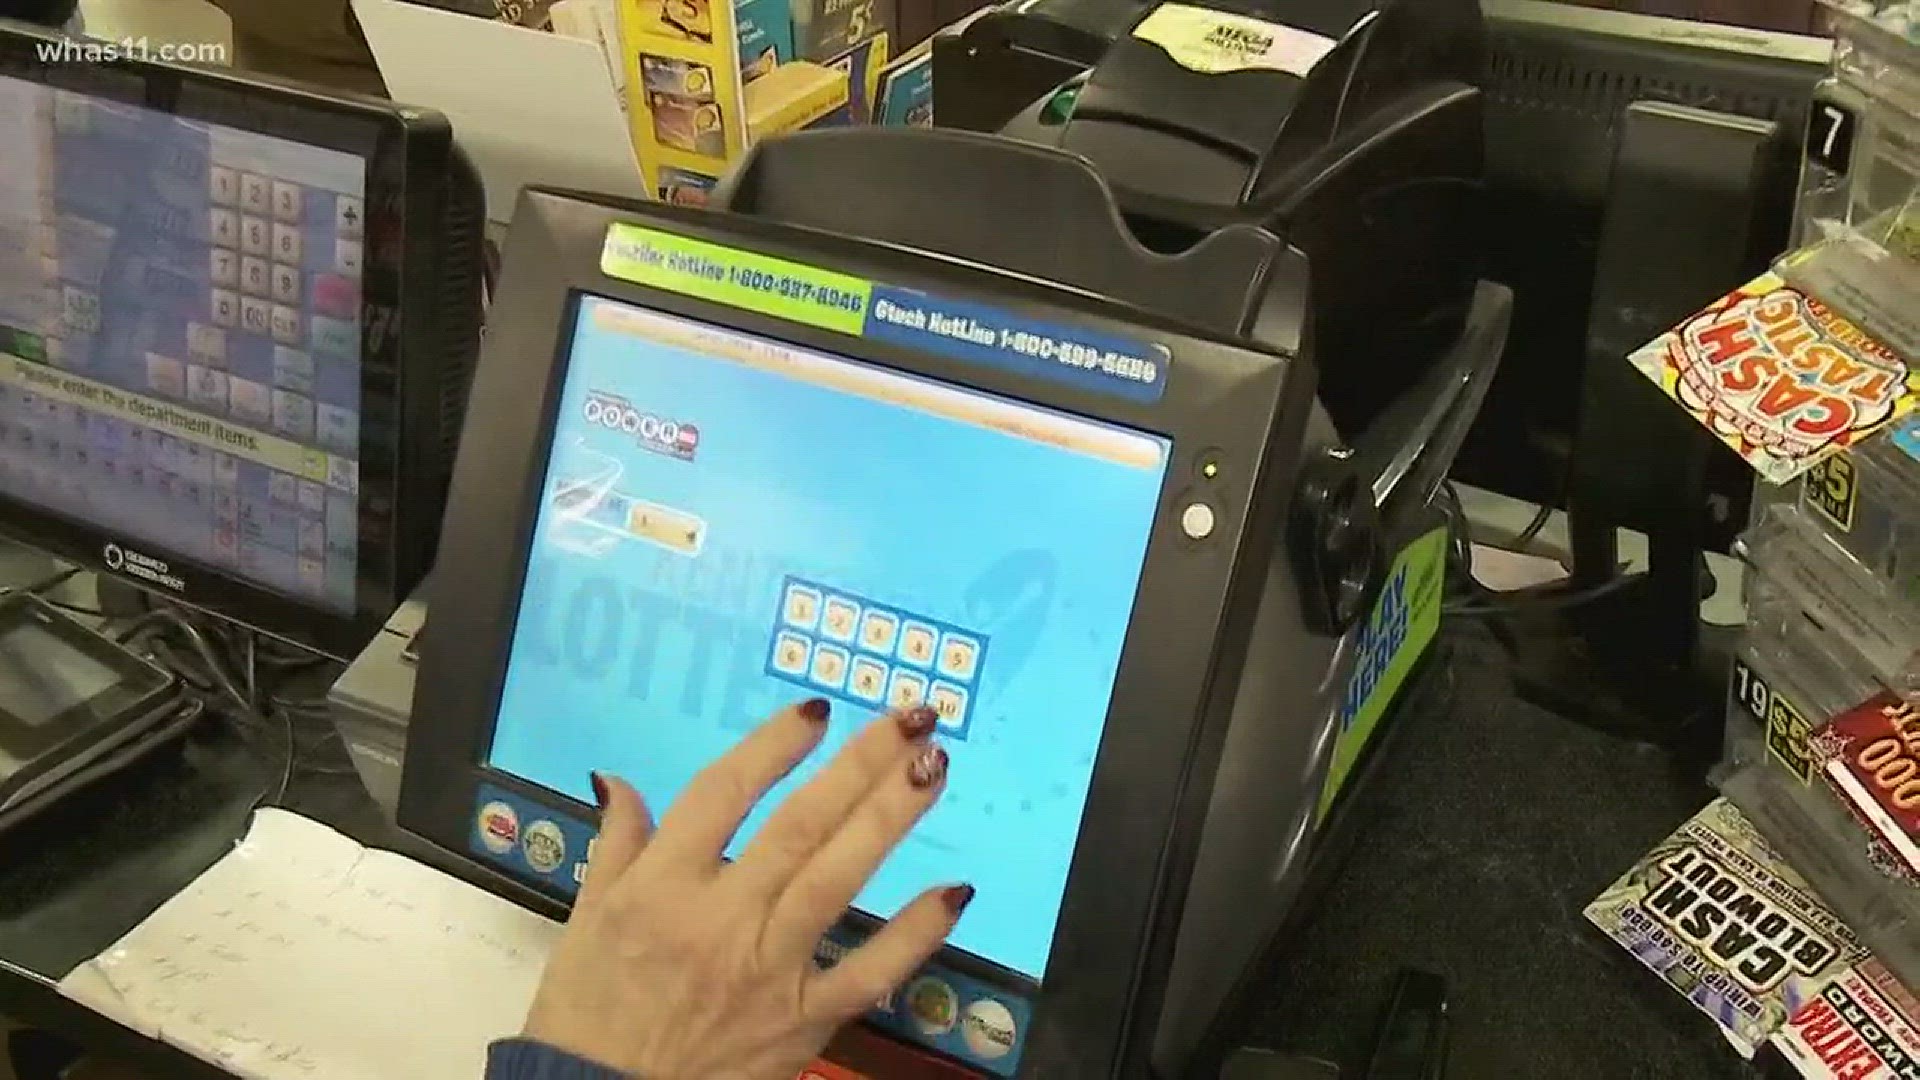 With a Powerball jackpot of $570 million and Mega Millions jackpot of $450 million, people across Kentuckiana are hoping they'll hit it big during tonight and Saturday's drawings.